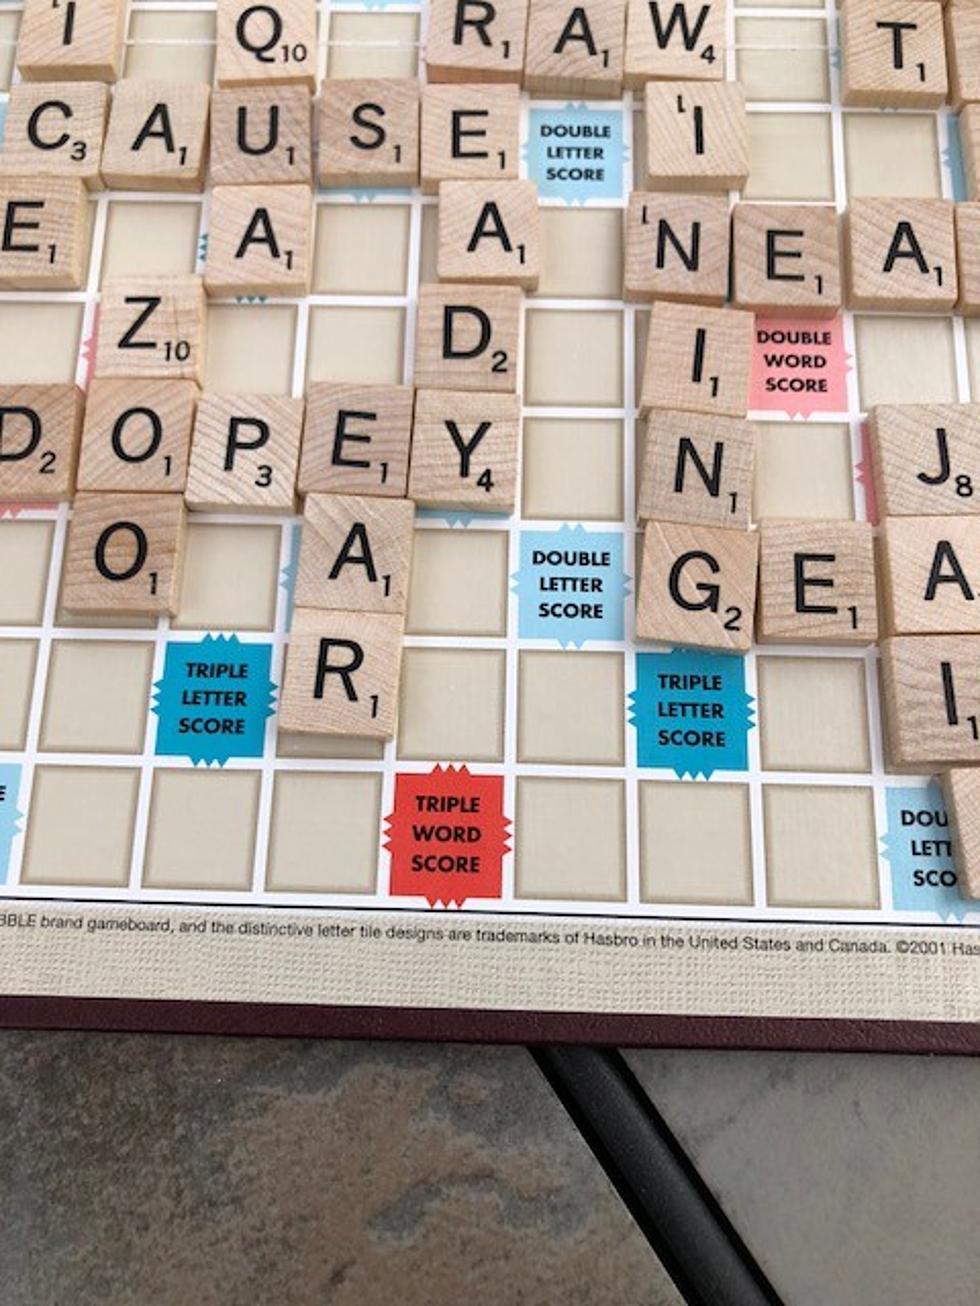 Is This A Legal SCRABBLE Move? [PHOTO]